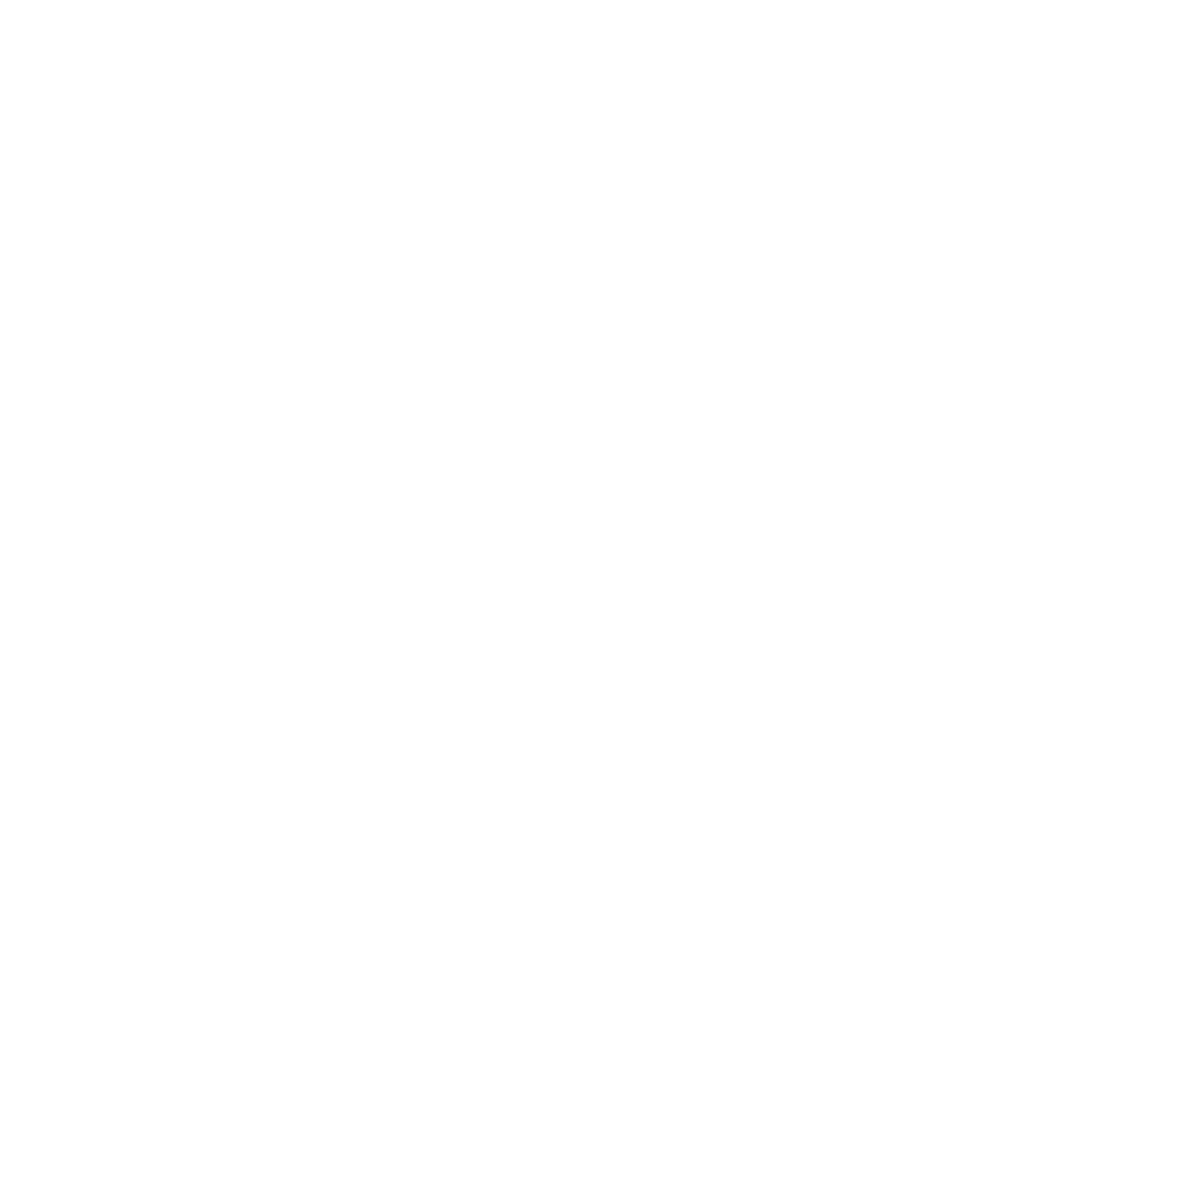 New YOUniverse